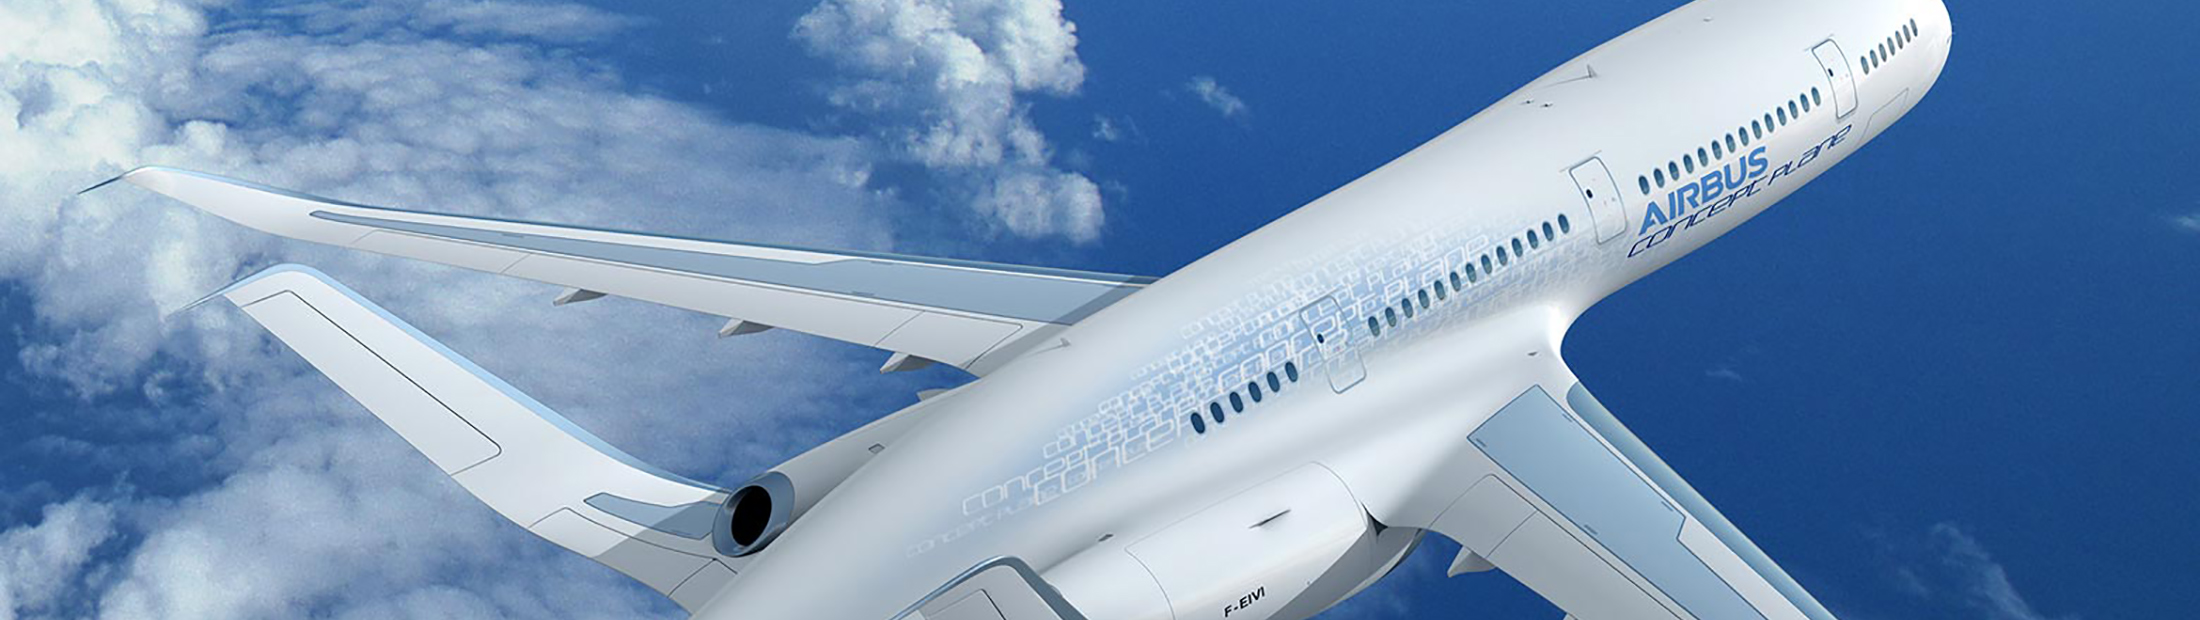 aircraft design - Why don't Airbus planes have perfectly smooth